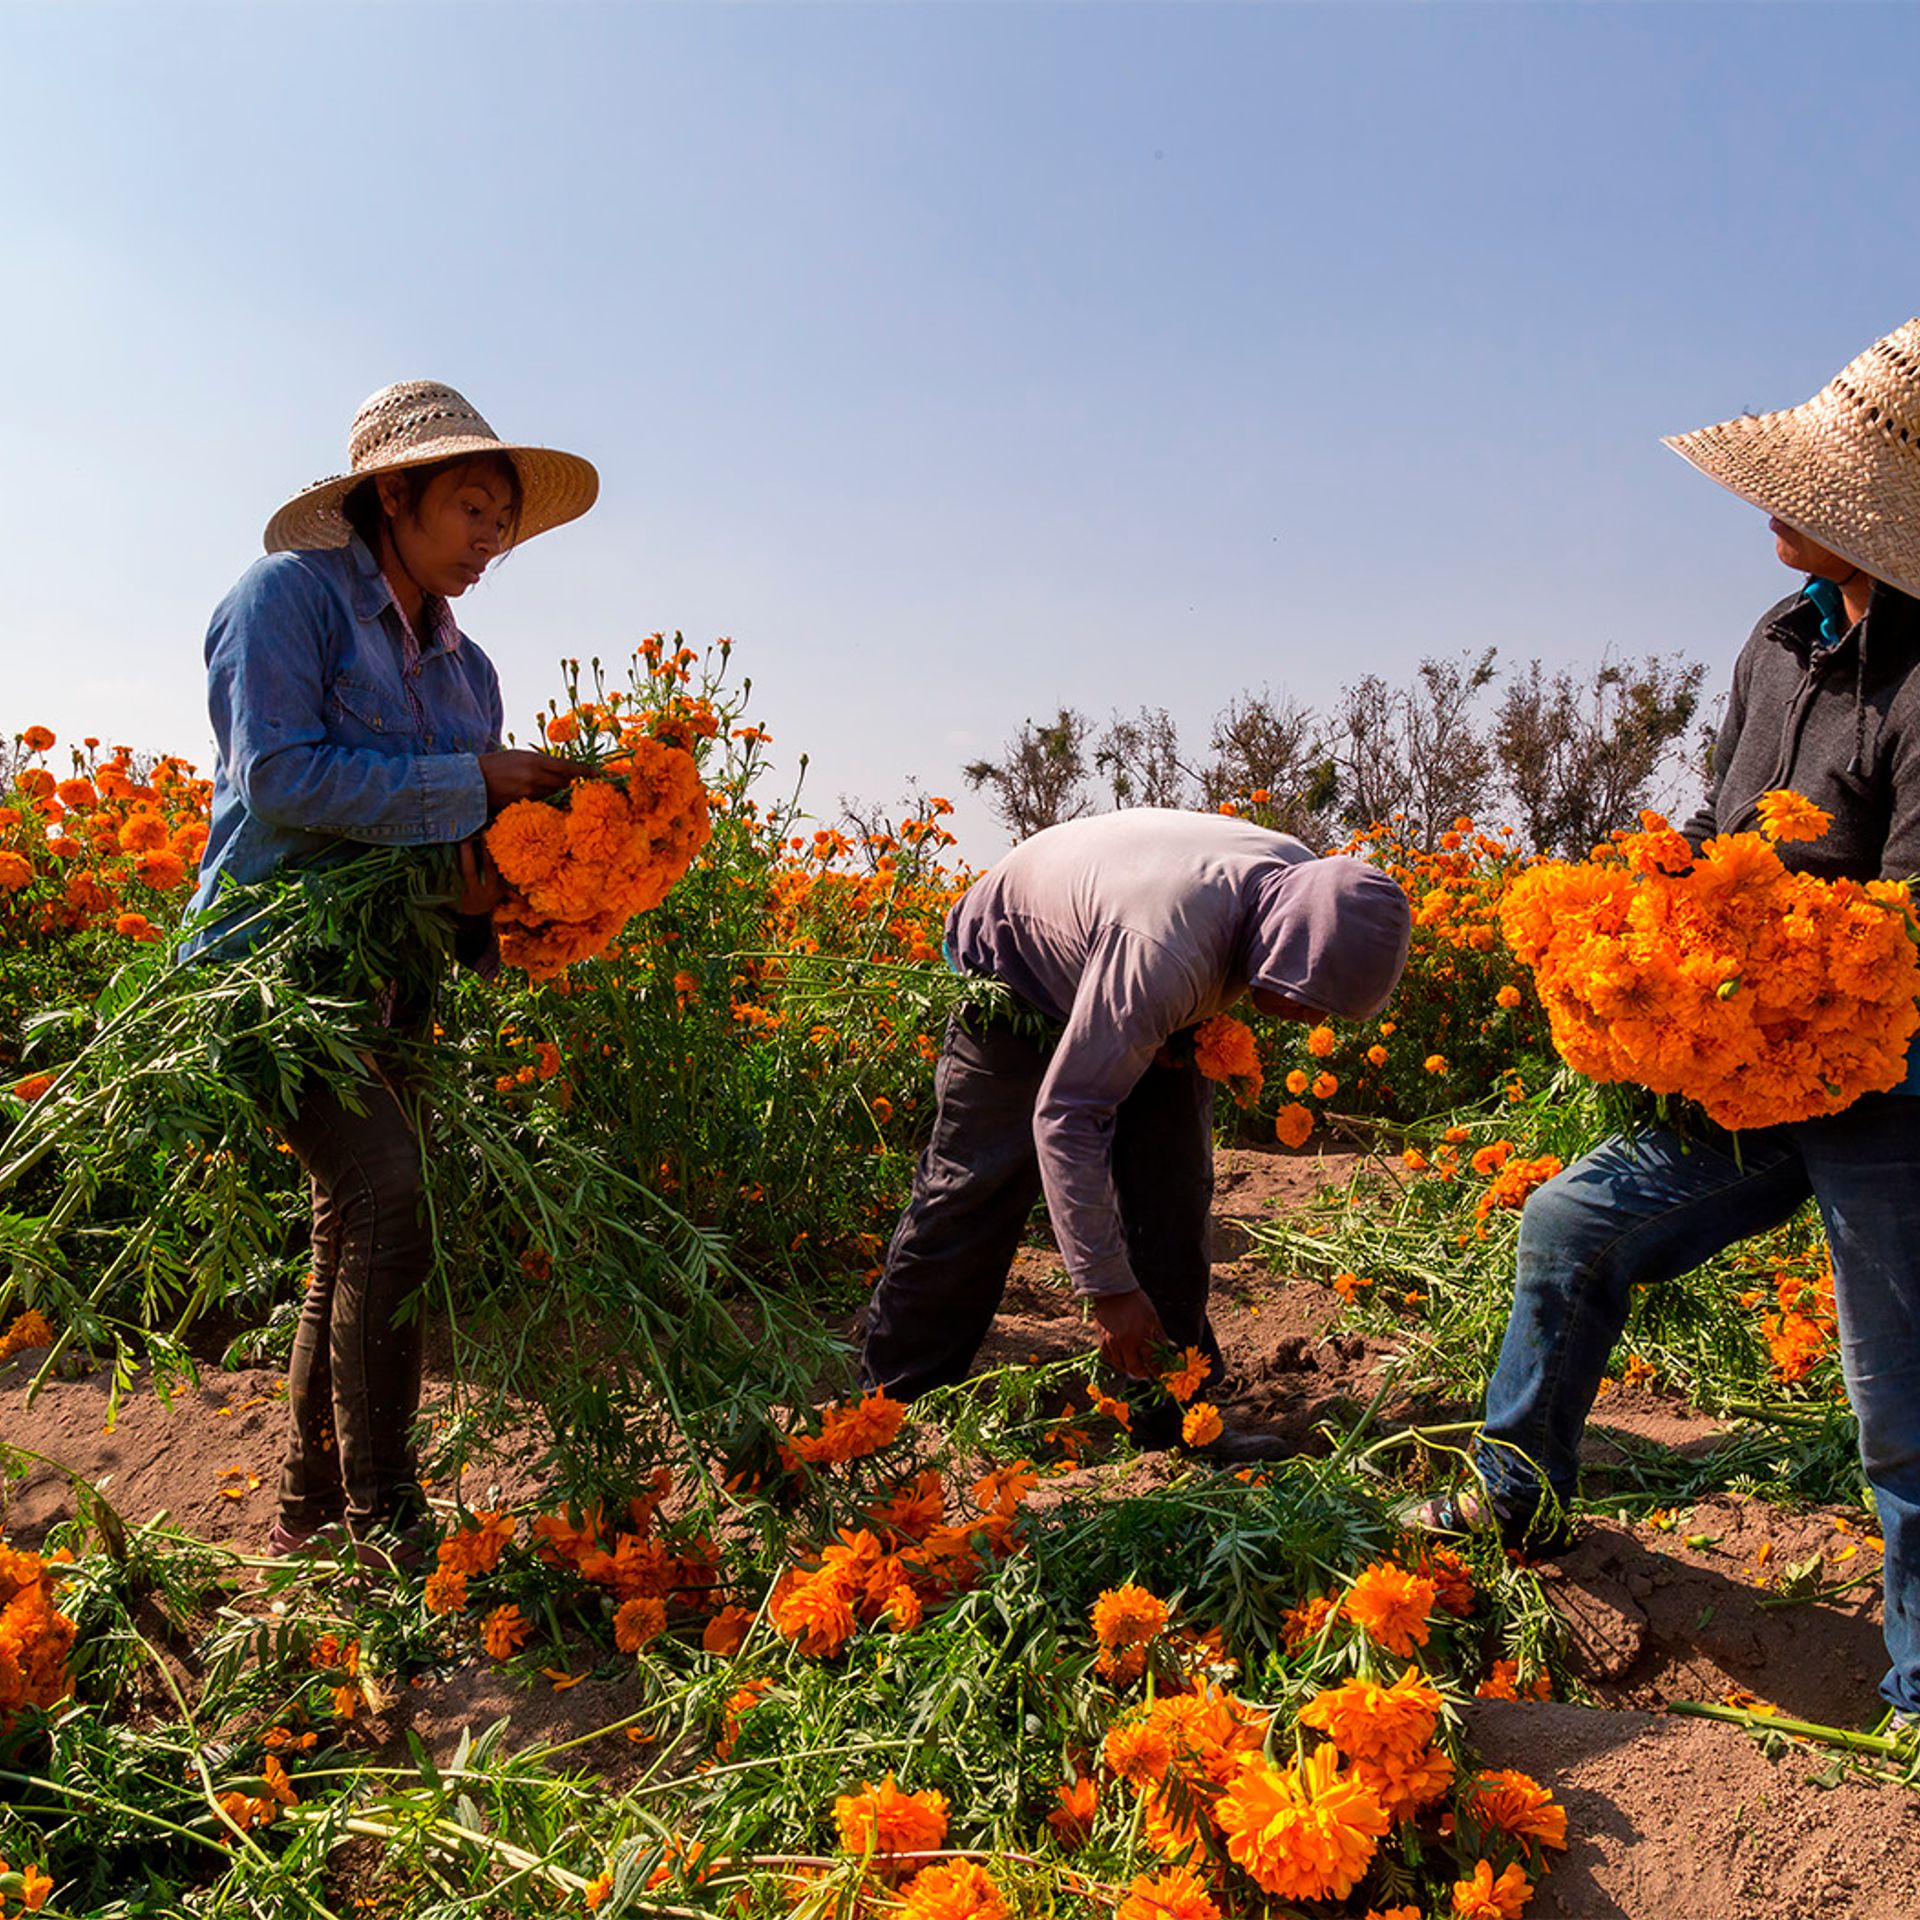 Image of farm workers harvesting flowers in a field